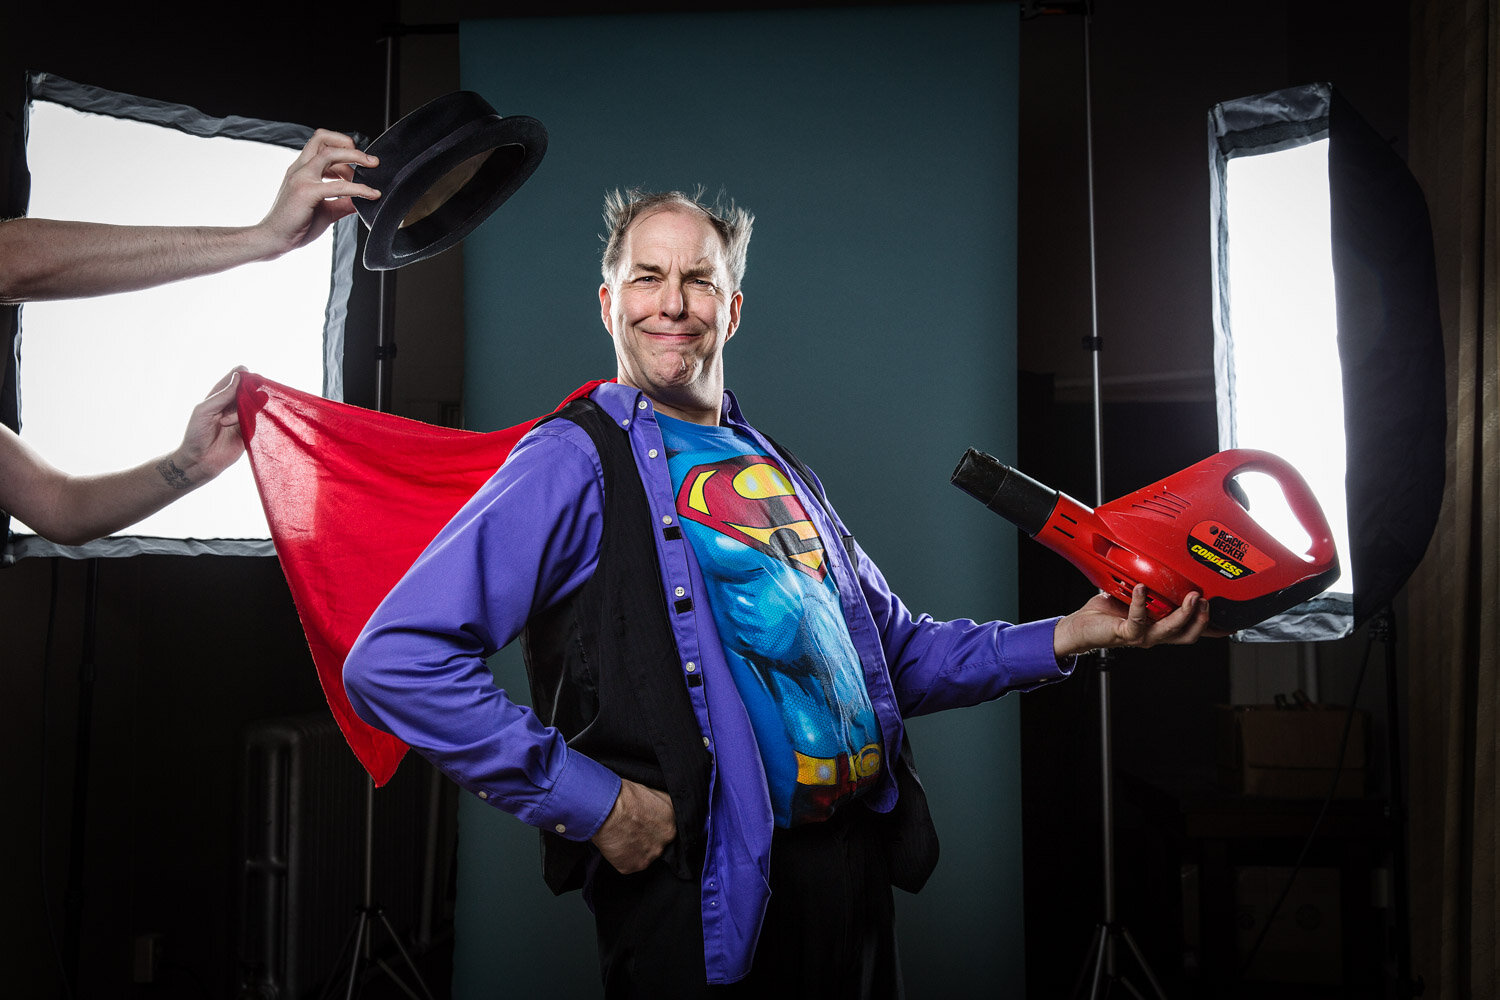 quirky promotional photo of juggler Steve Russell  dressed as superman holding a leaf blower by creative portrait photographer Hanna Agar